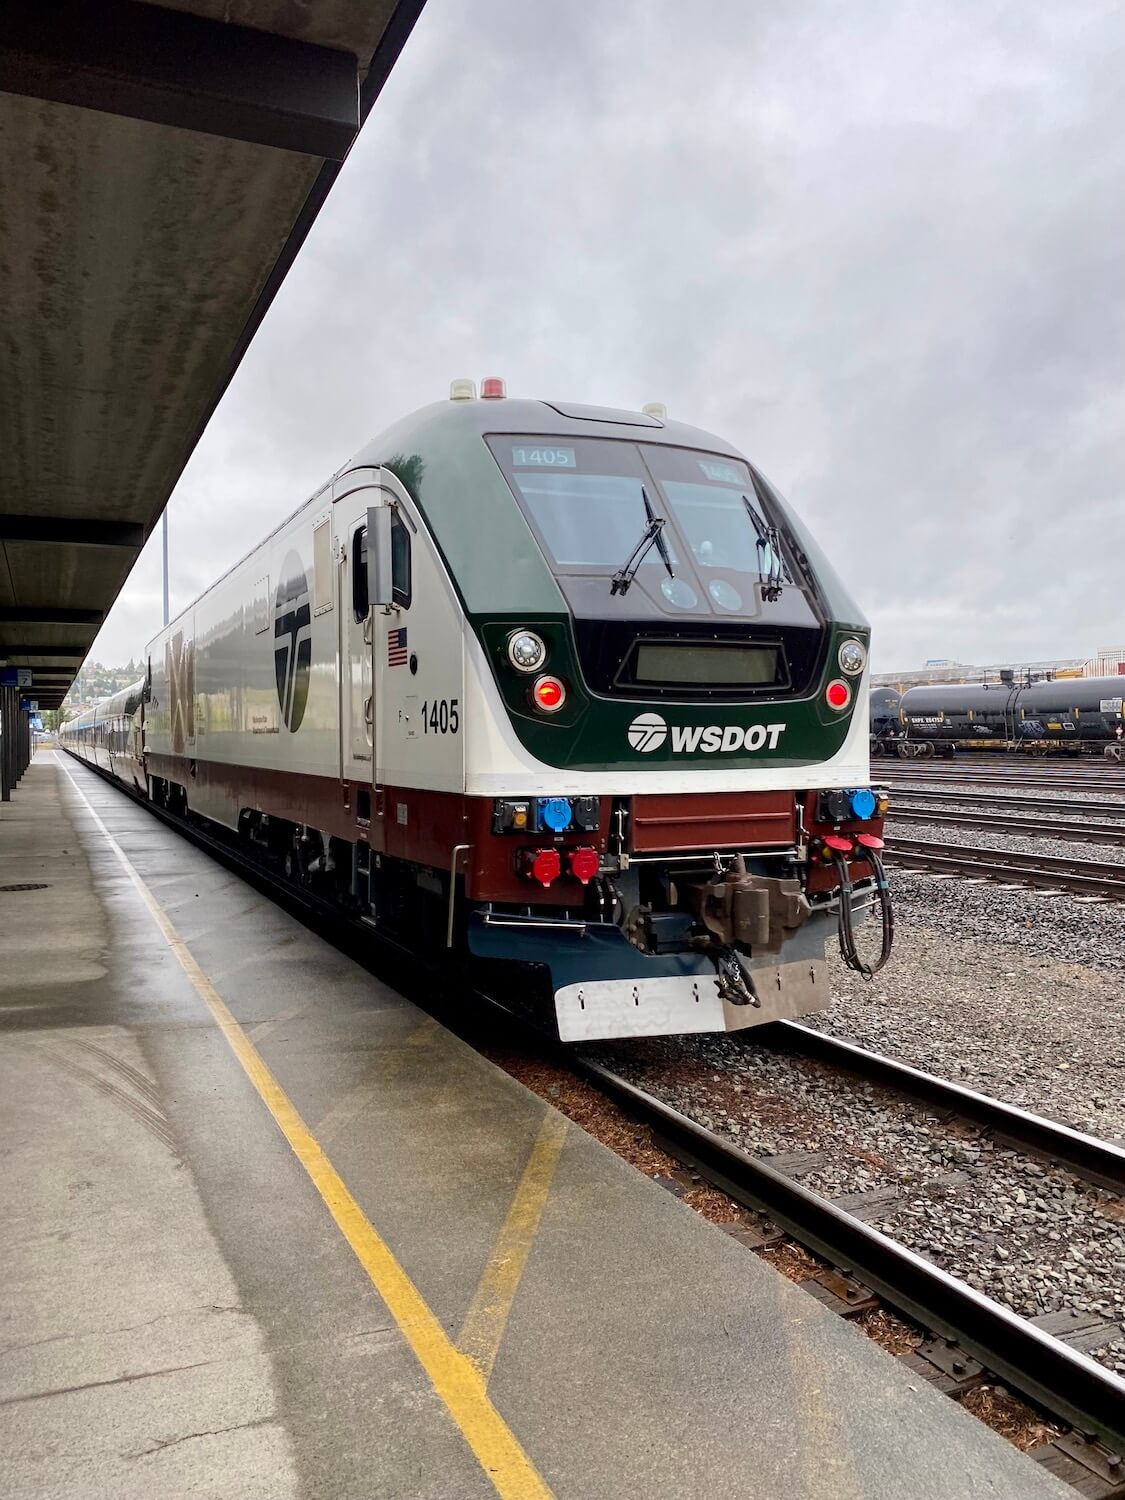 The engine of the Amtrak Cascades on the way from Seattle to Portland. The yellow line of the train platform can be seen running the length of the photo which contacts with the green and white coloring of the train engine that has WSDOT displayed on the front.